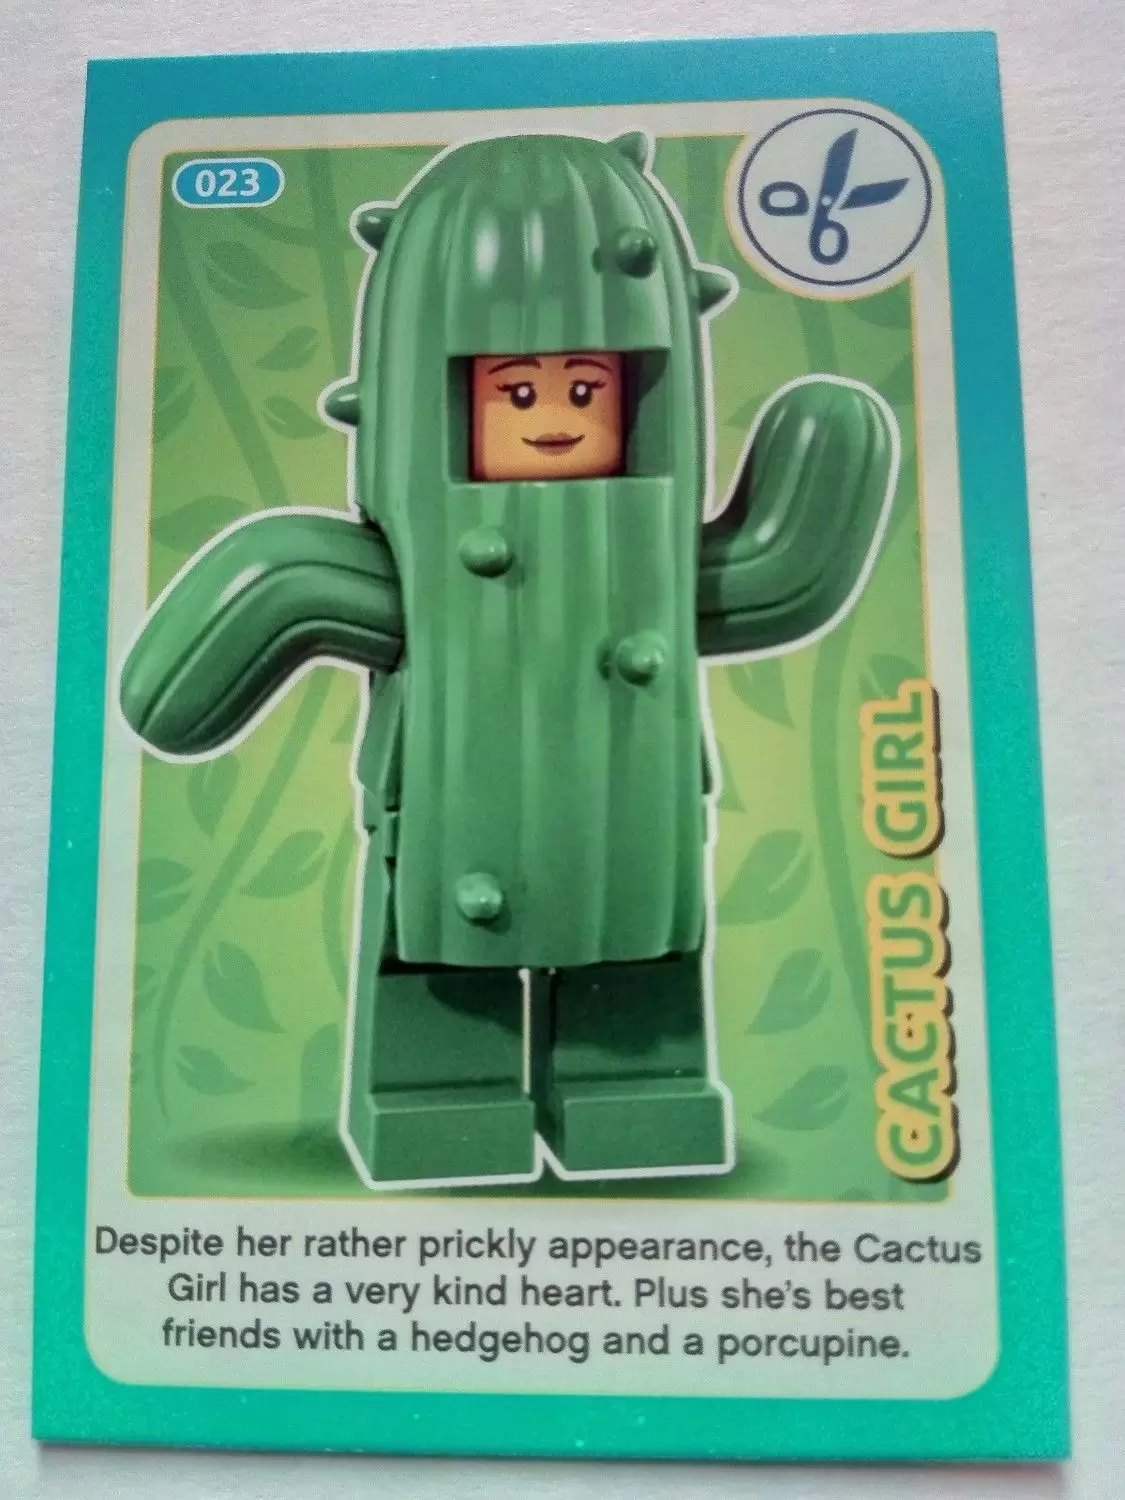 2018 Lego Incredible Inventions Create The World Card Cactus Girl # 023 